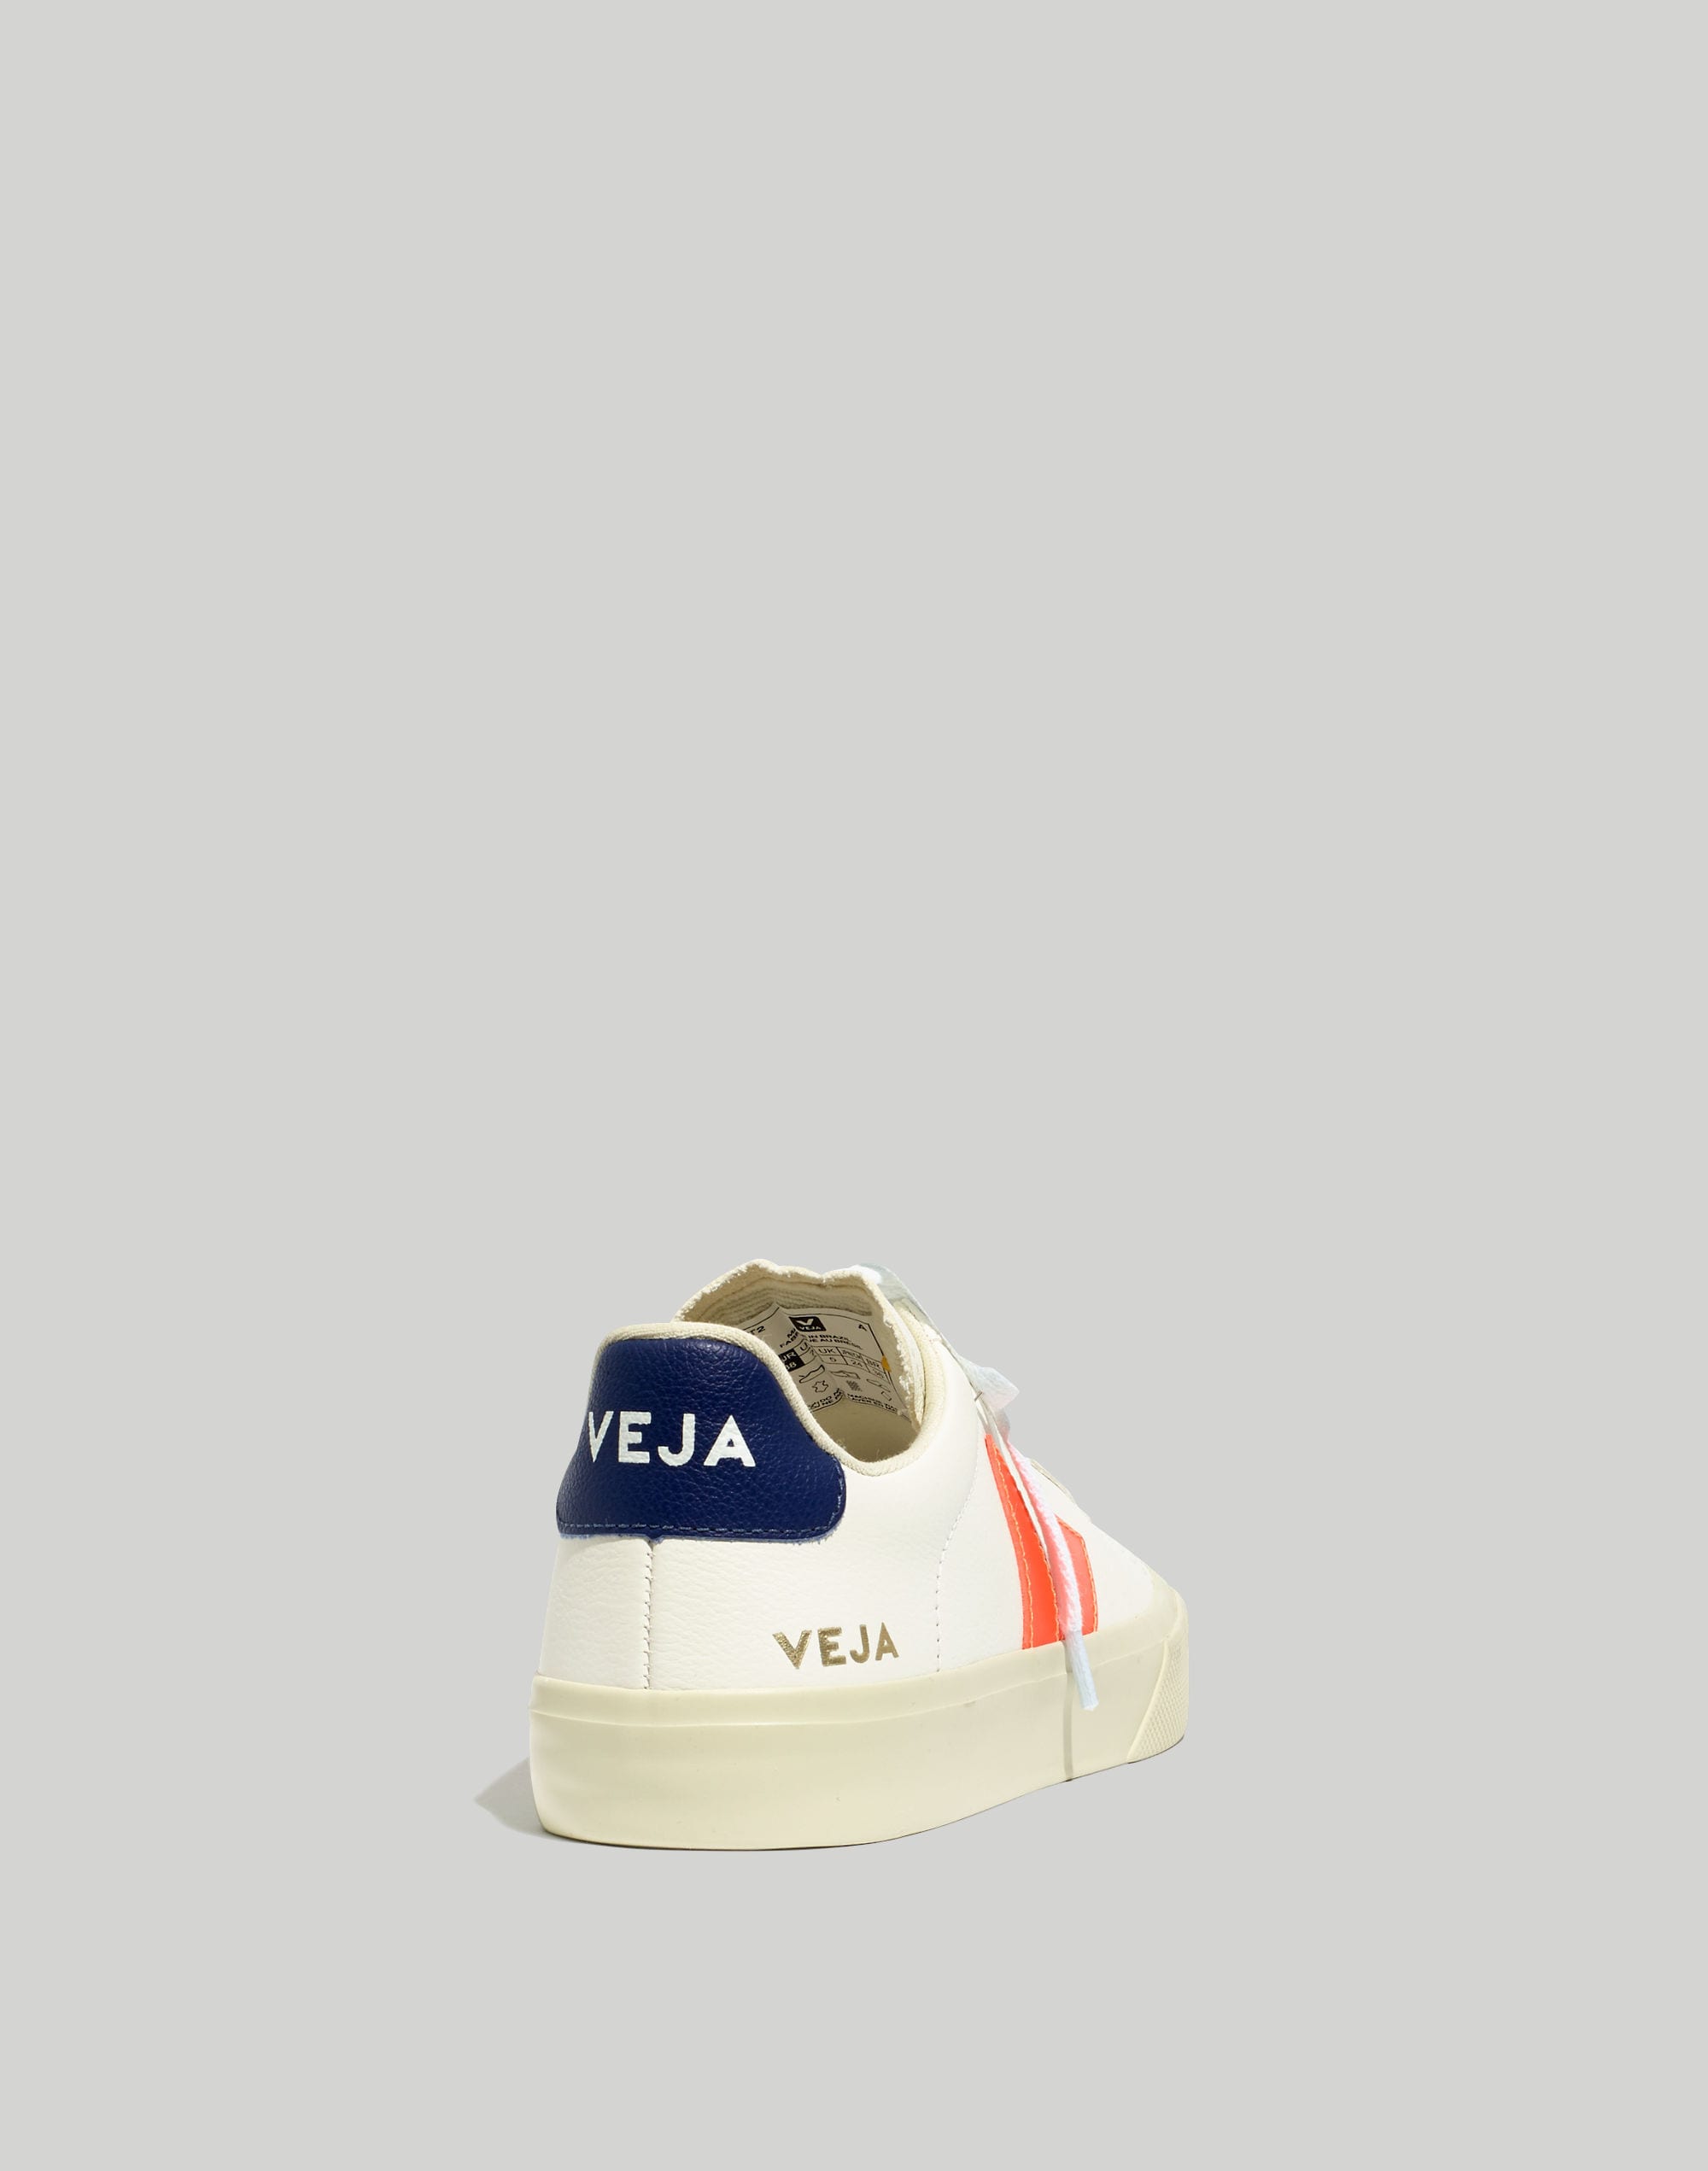 Veja Campo Chefree Sneakers In Lilla Leather - ShopStyle